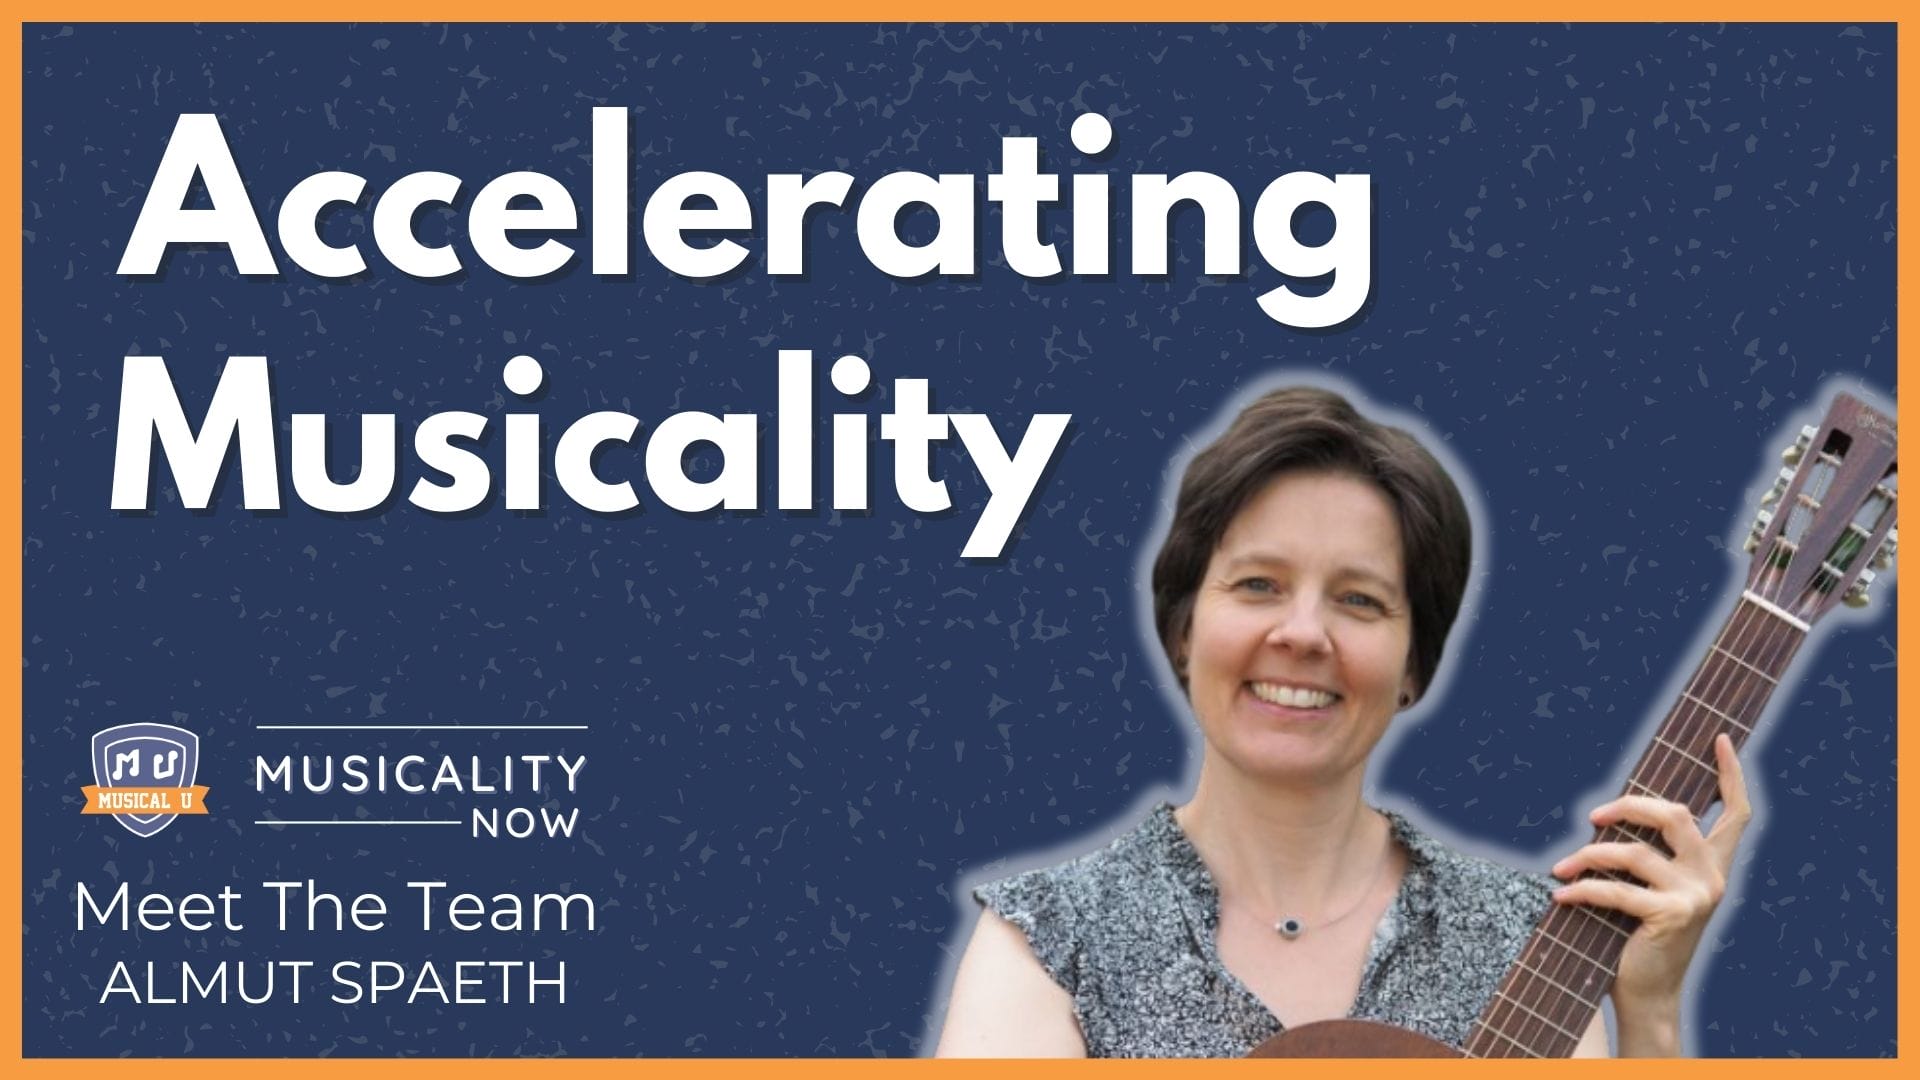 Accelerating Musicality (Meet The Team, with Almut Spaeth)